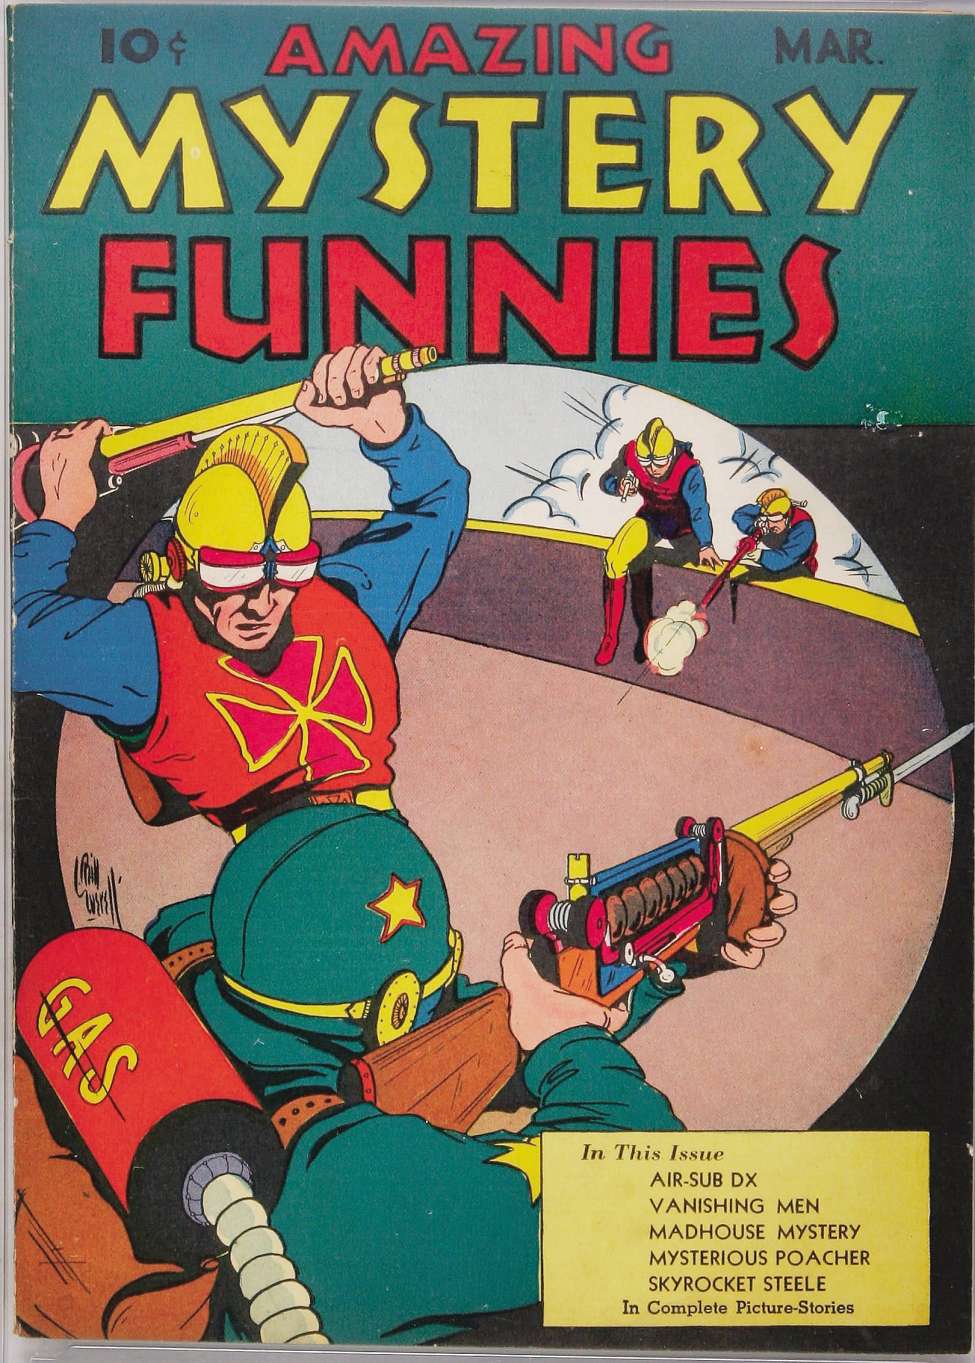 Book Cover For Amazing Mystery Funnies 7 (v2 3) - Version 1